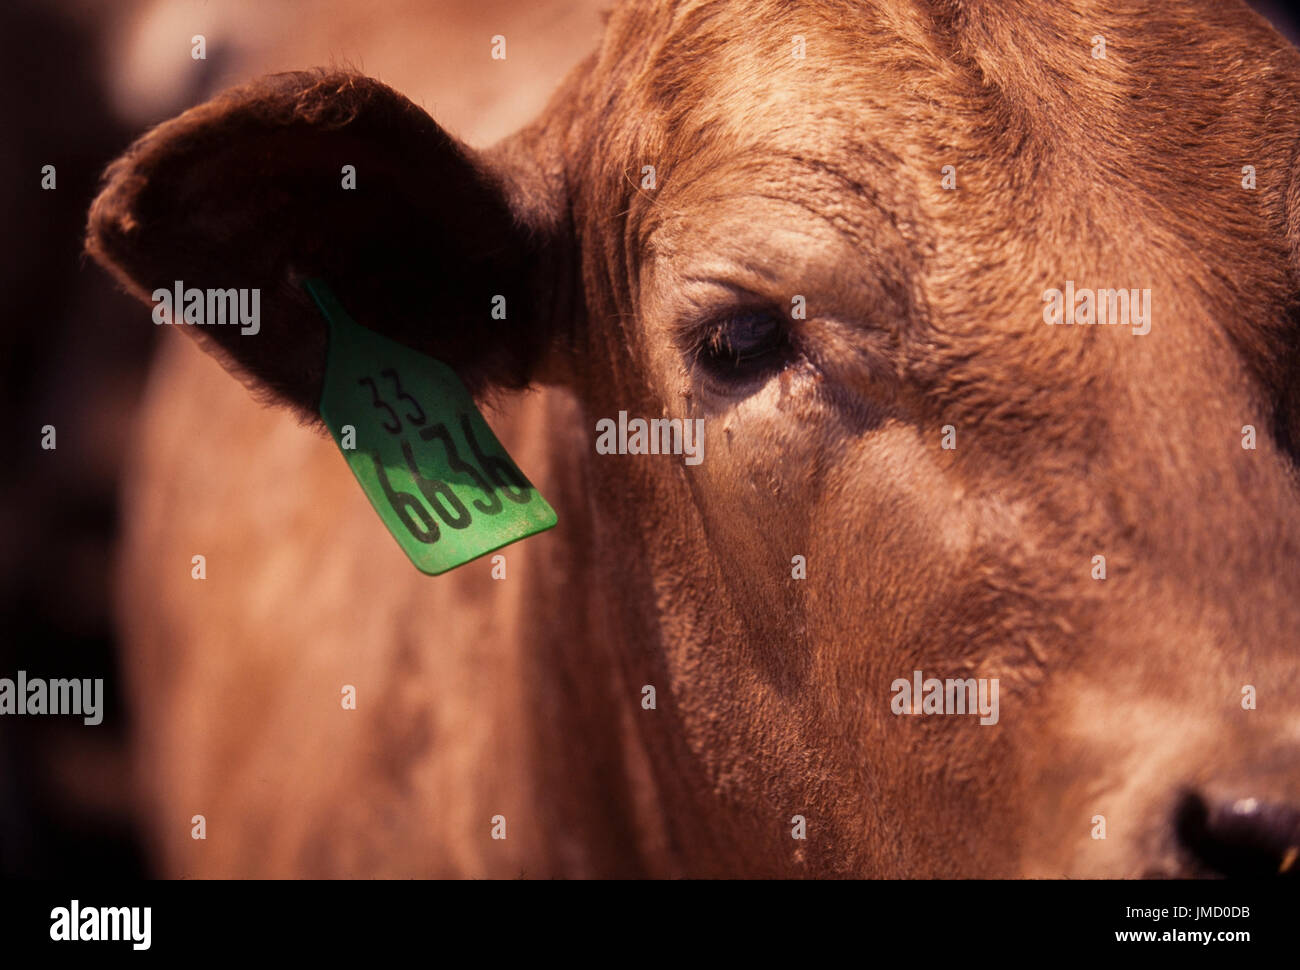 Cattle feed on a commercial feedlot prior to slaughter for beef. Stock Photo